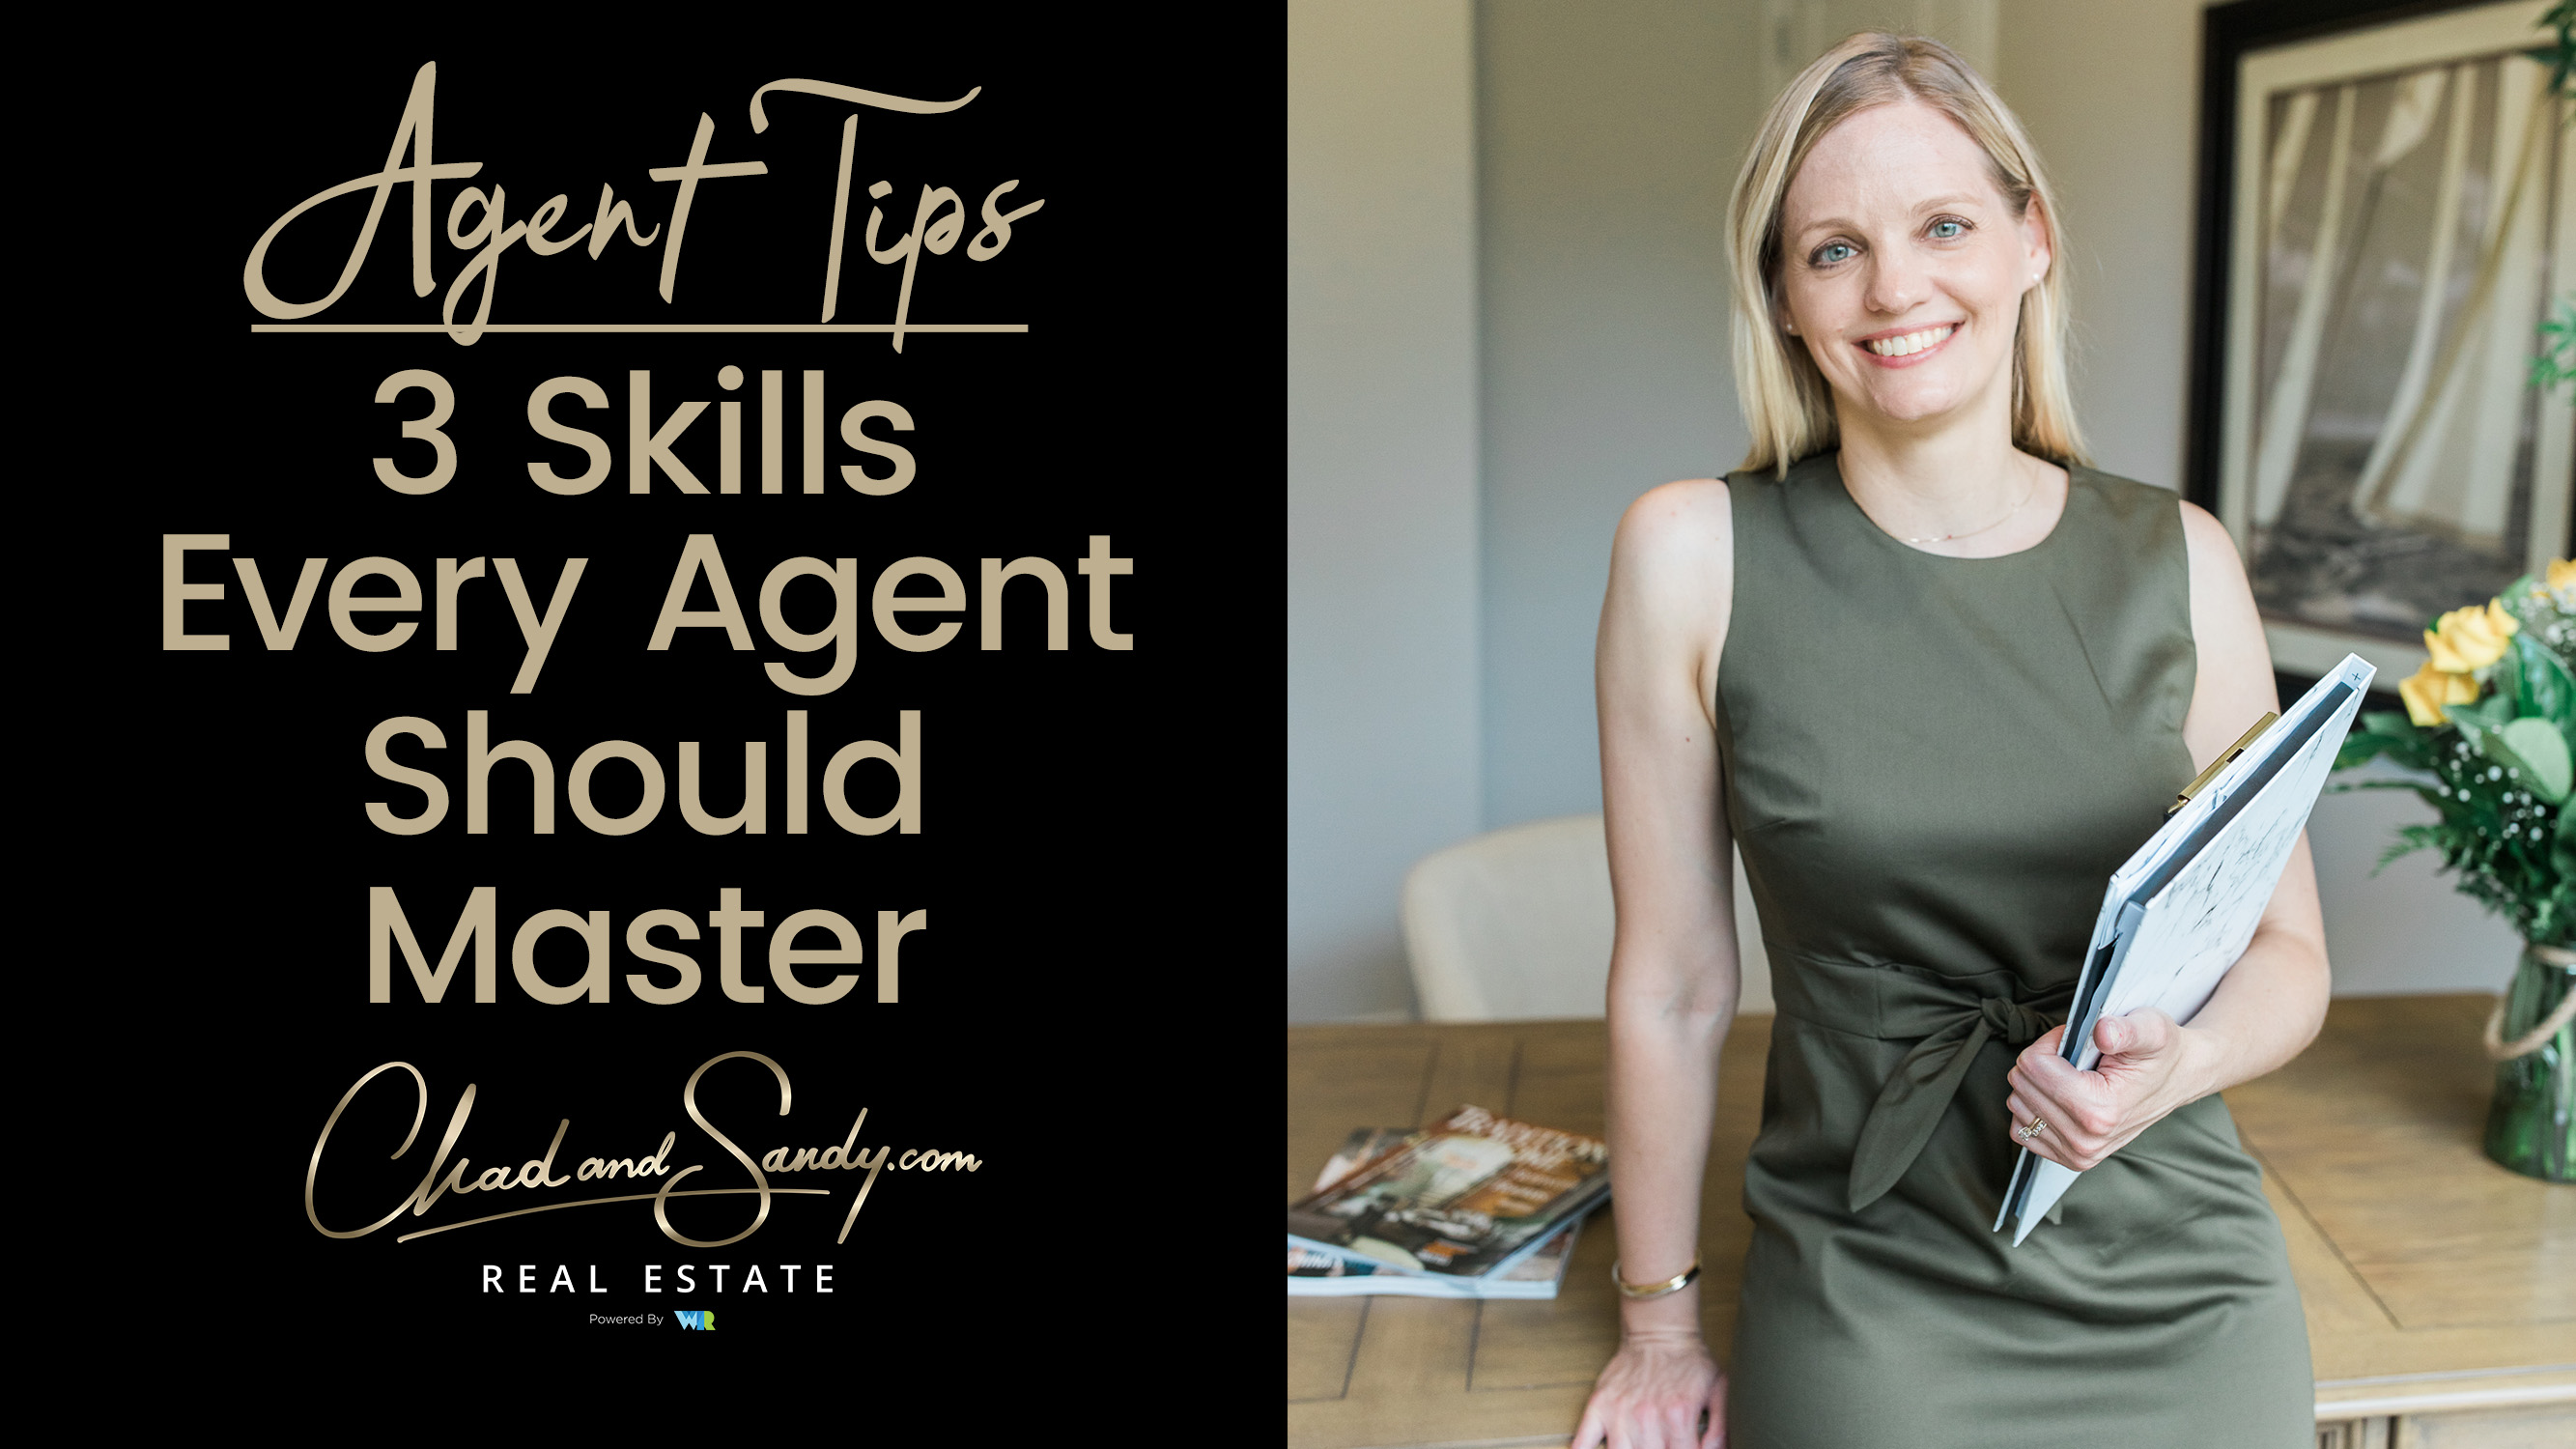 The 3 Skills That Agents Need to Master